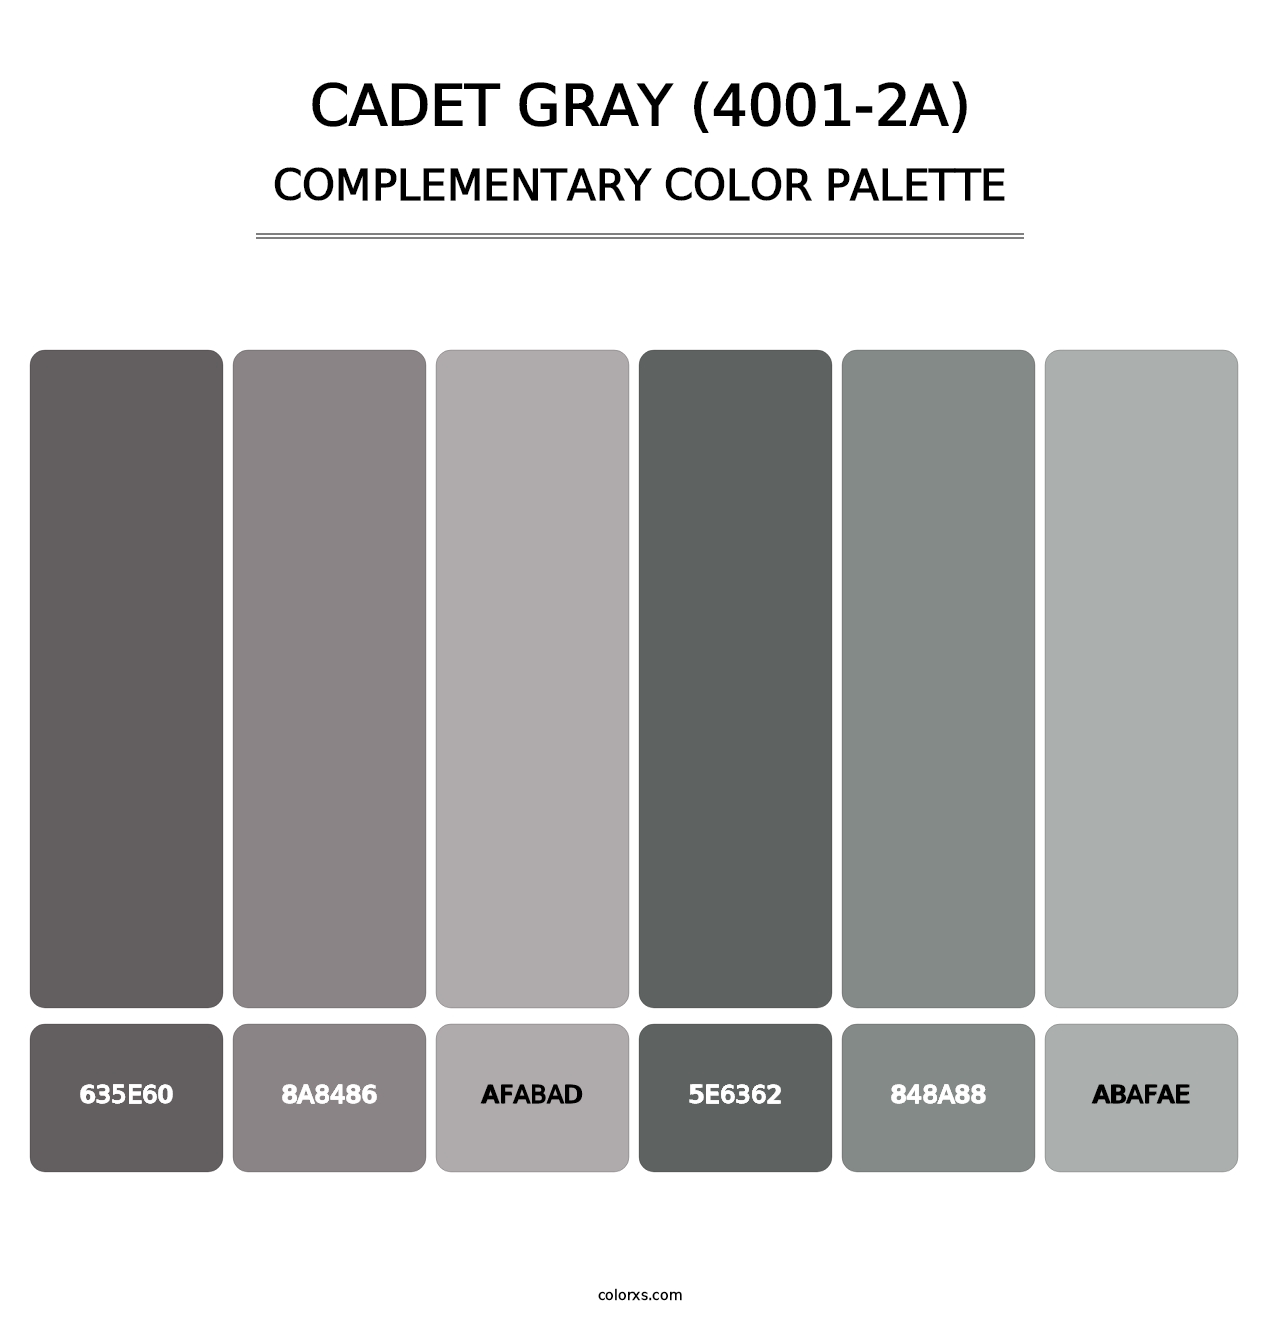 Cadet Gray (4001-2A) - Complementary Color Palette